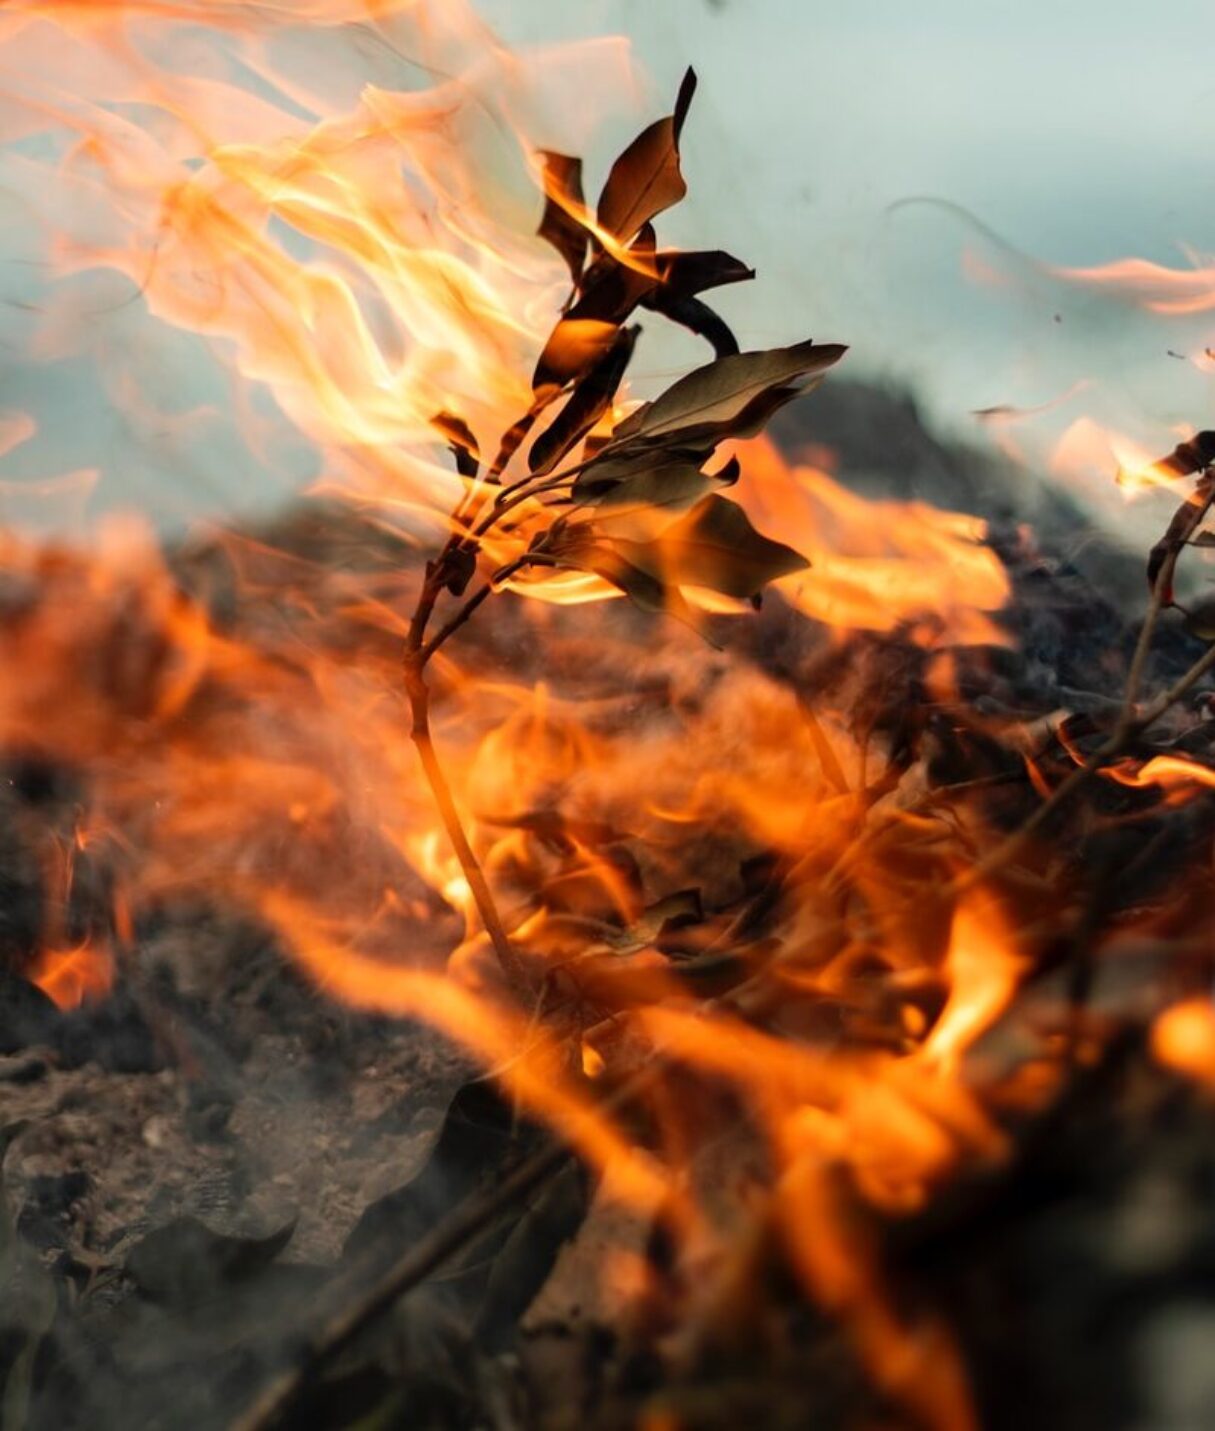 plant burned with fire